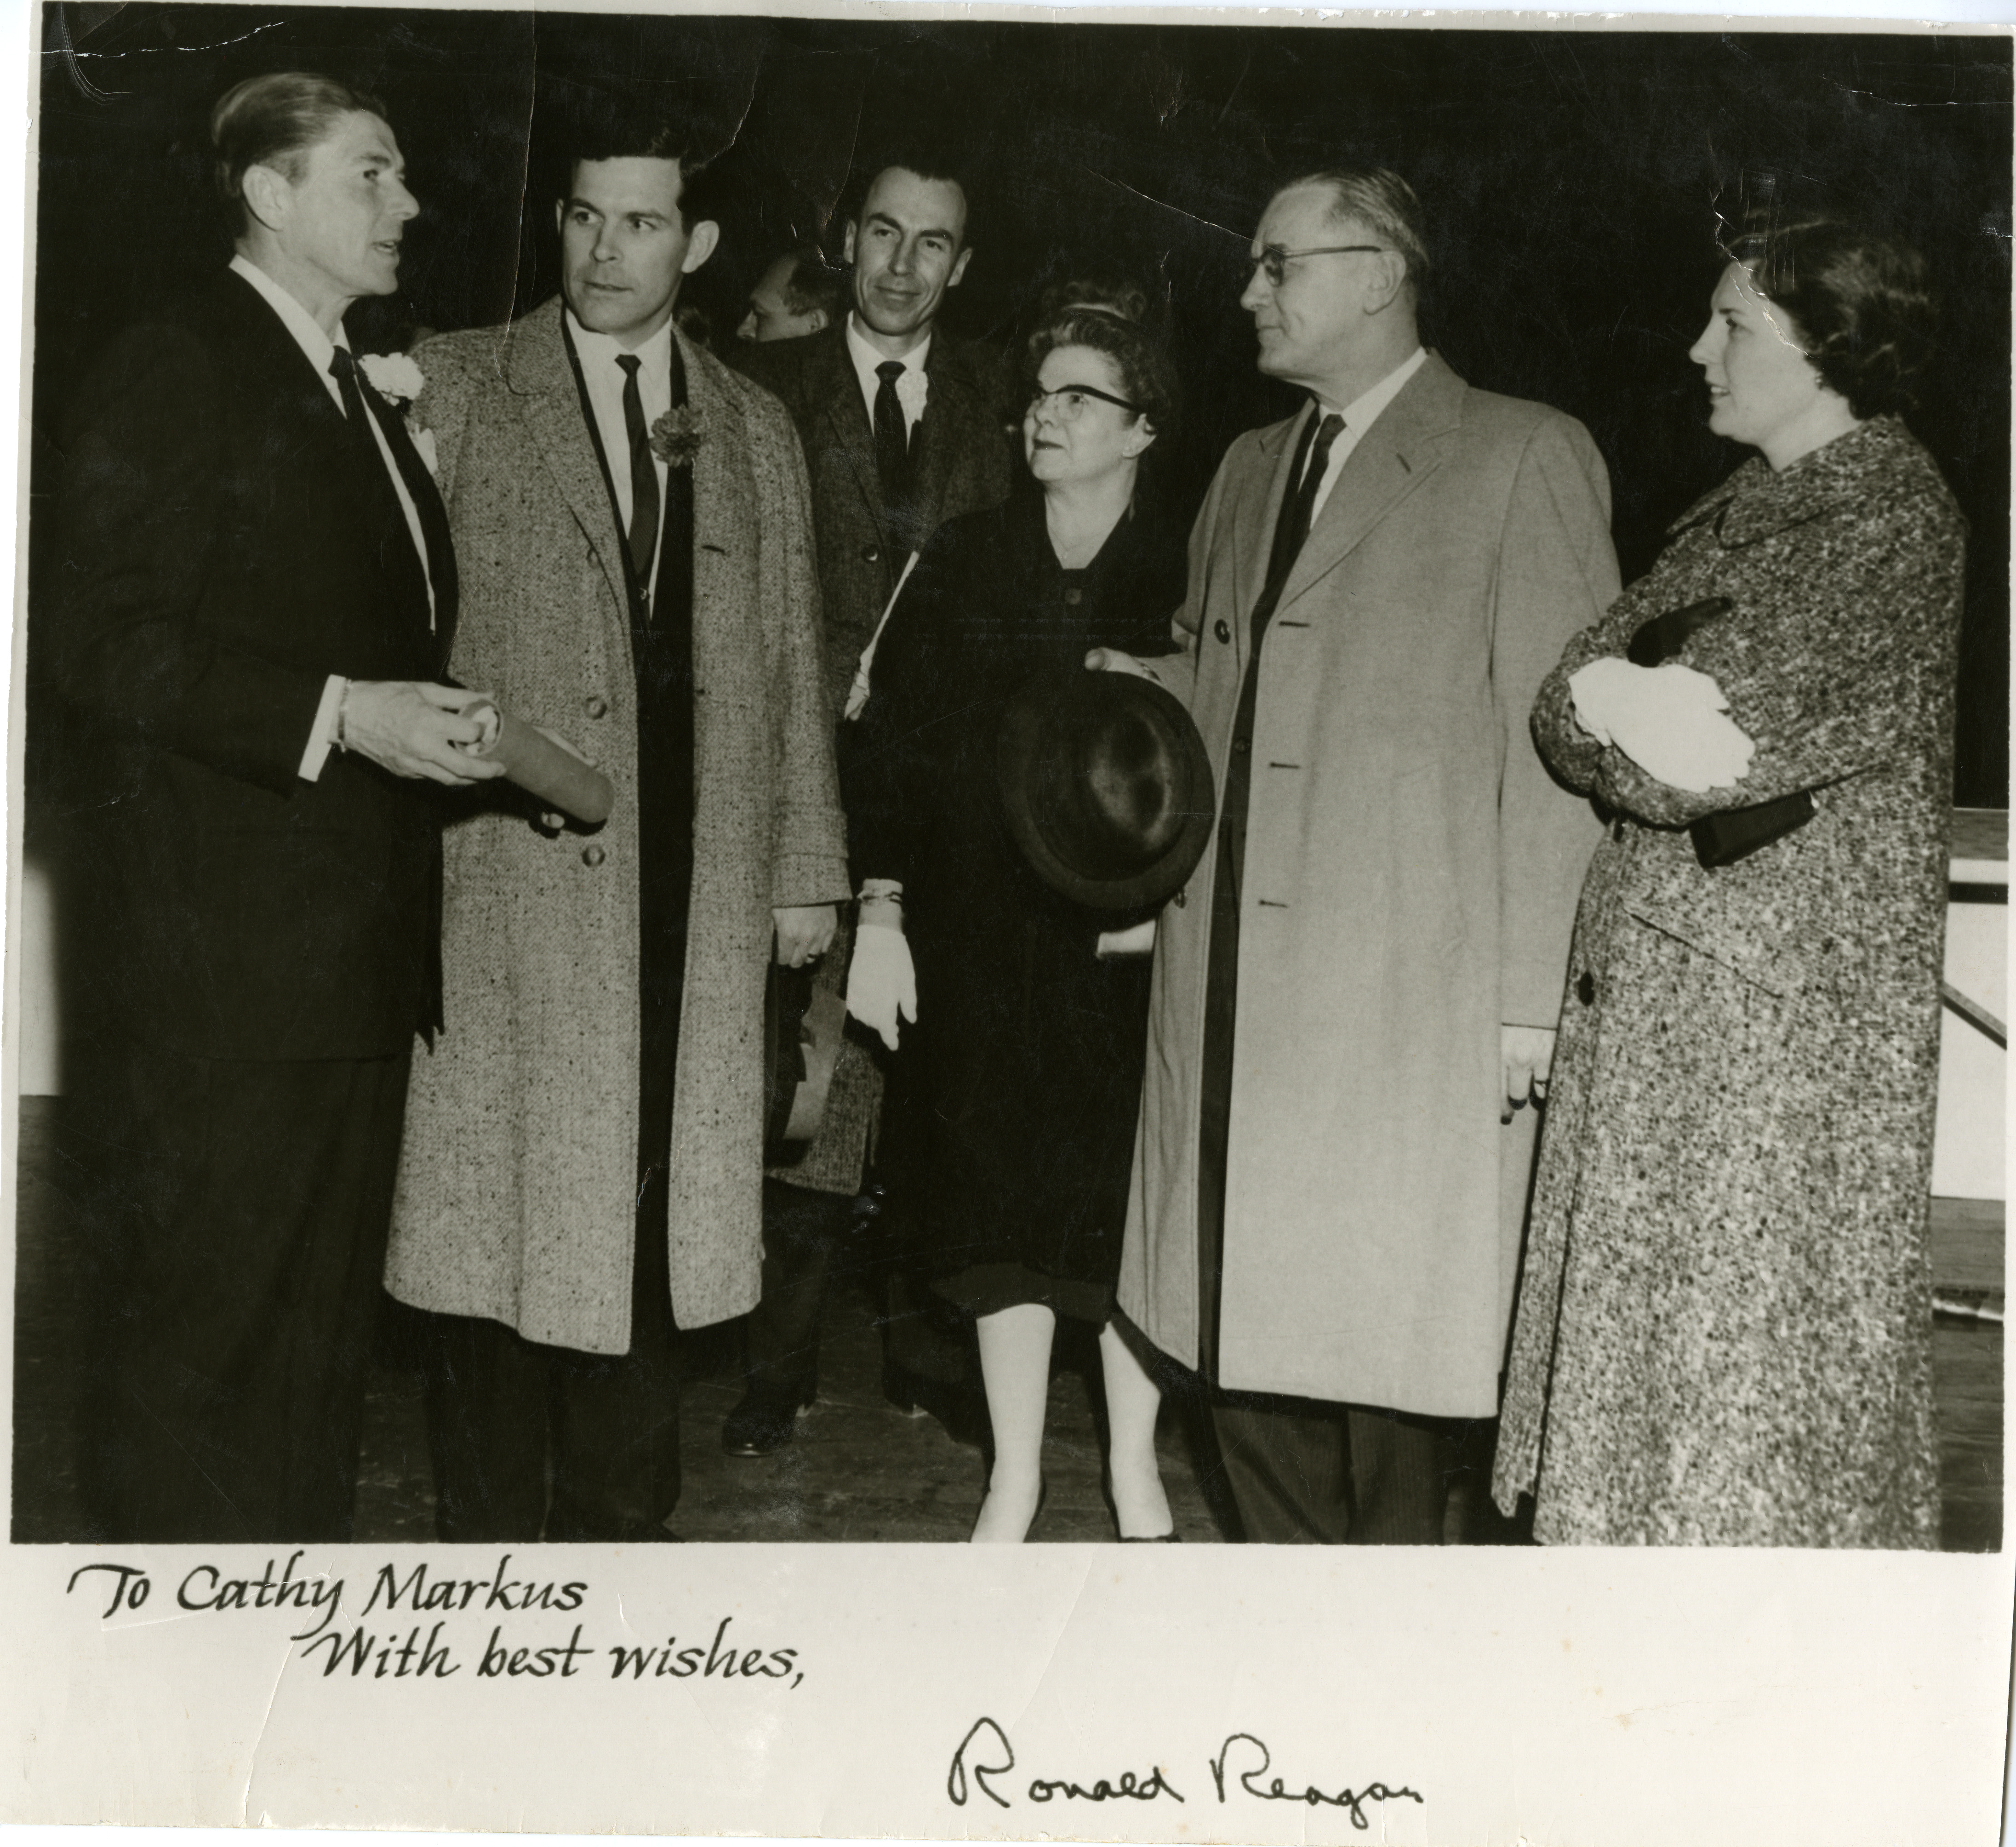 Ronald Reagan, Cathy Markus and others at unknown event (autographed by Ronald Reagan-copy)